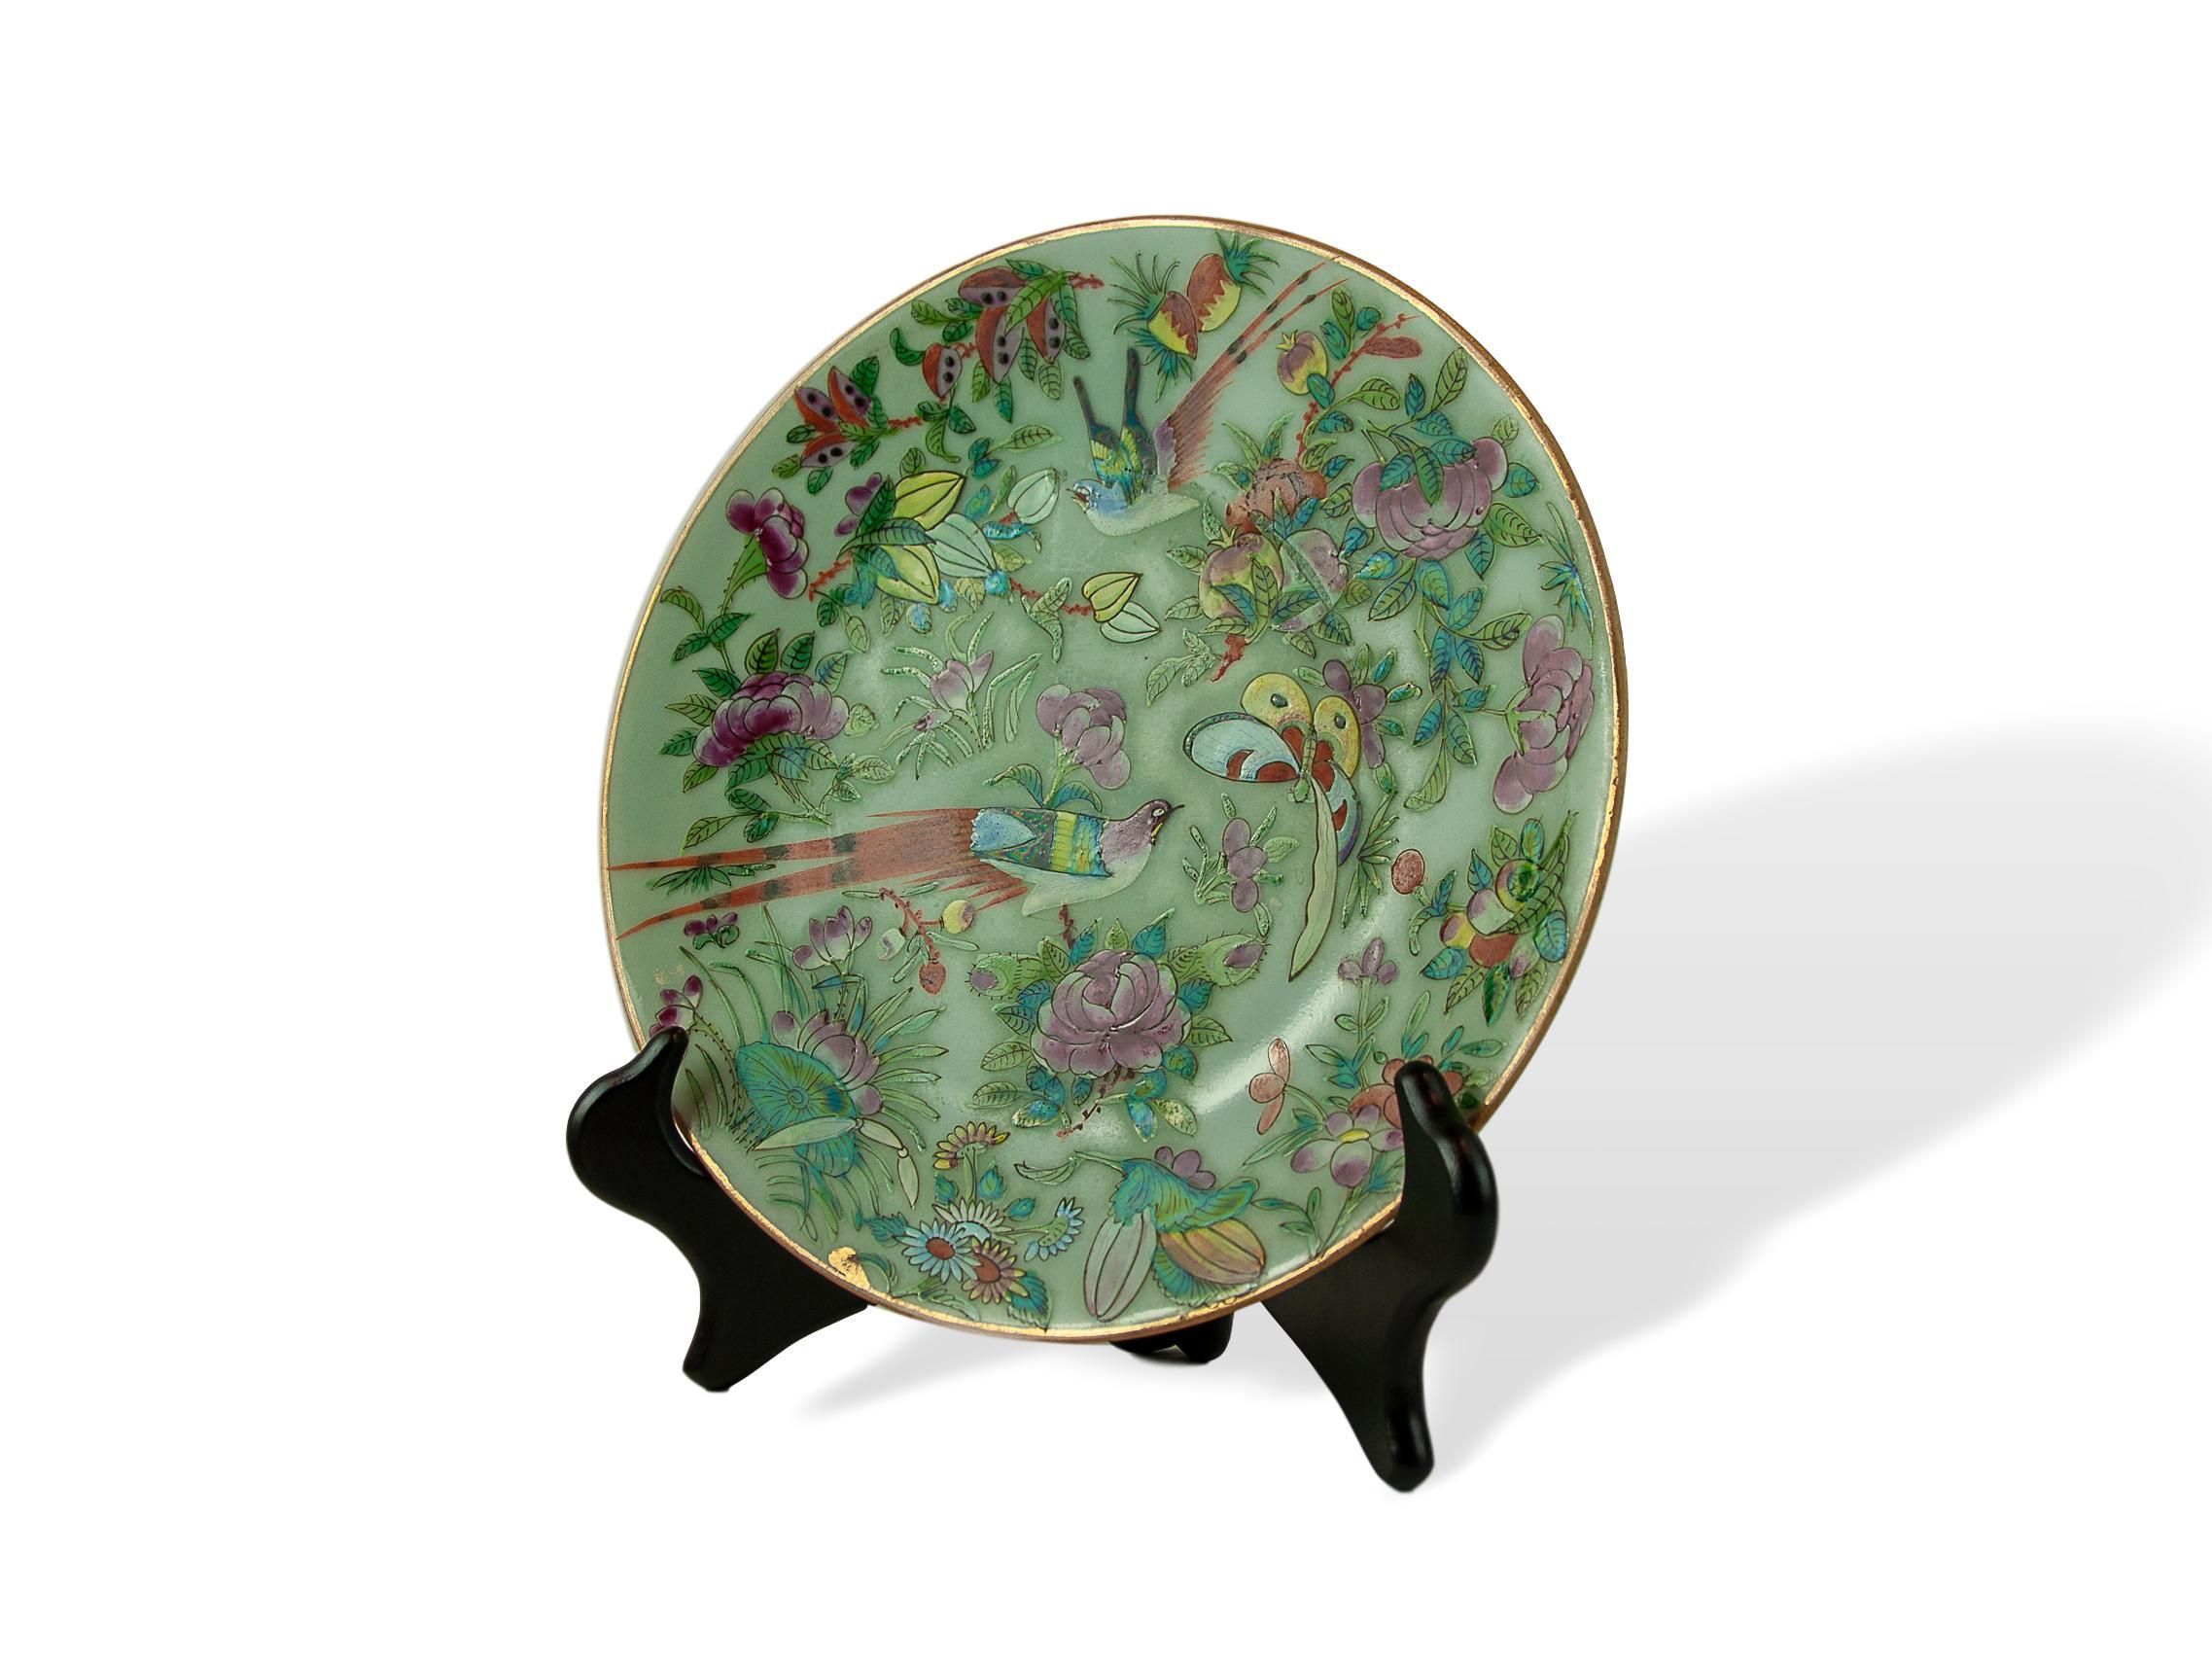 Chinese Celadon Famille rose 9.75 inch plate, Canton, circa 1820, enameled with stylized pheasants to center (rare configuration), floral and fruit sprays, reserved on a celadon ground. Underglaze-blue seal mark.